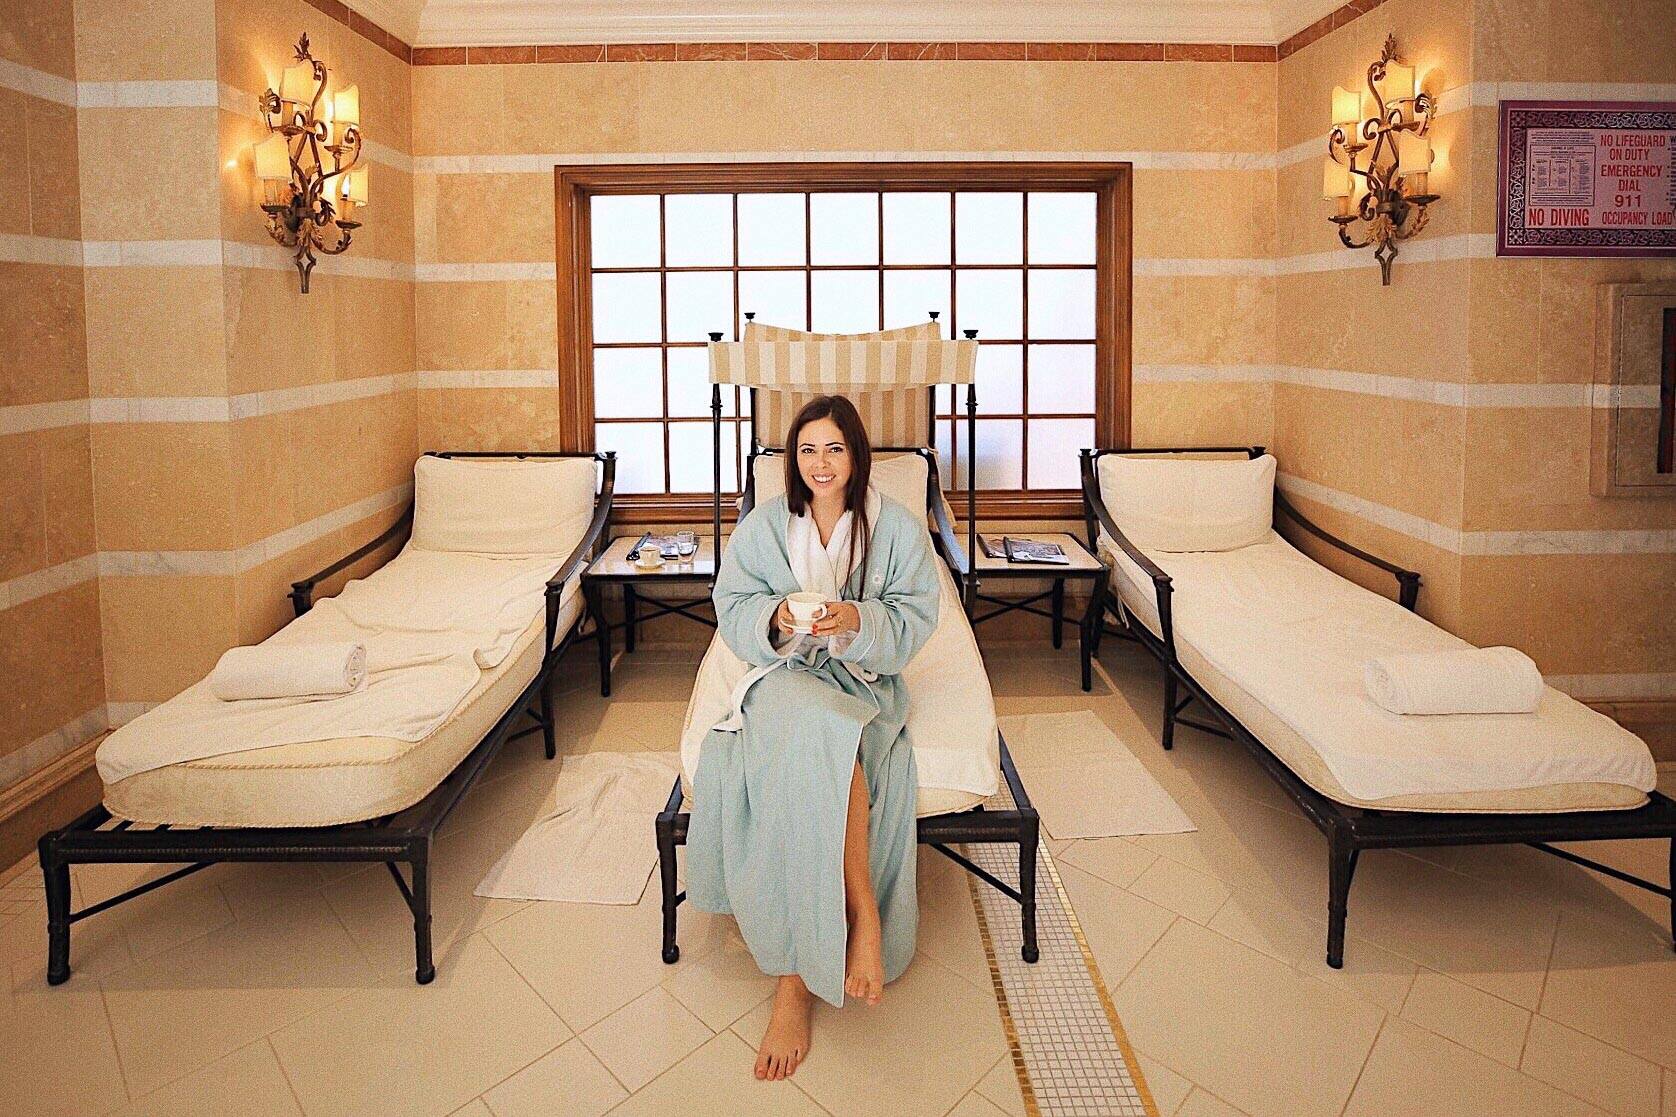 Relaxing at the spa at the Fairmont Grand Del Mar, per Le Club AccorHotel's Seeker Profile quiz recommendation!